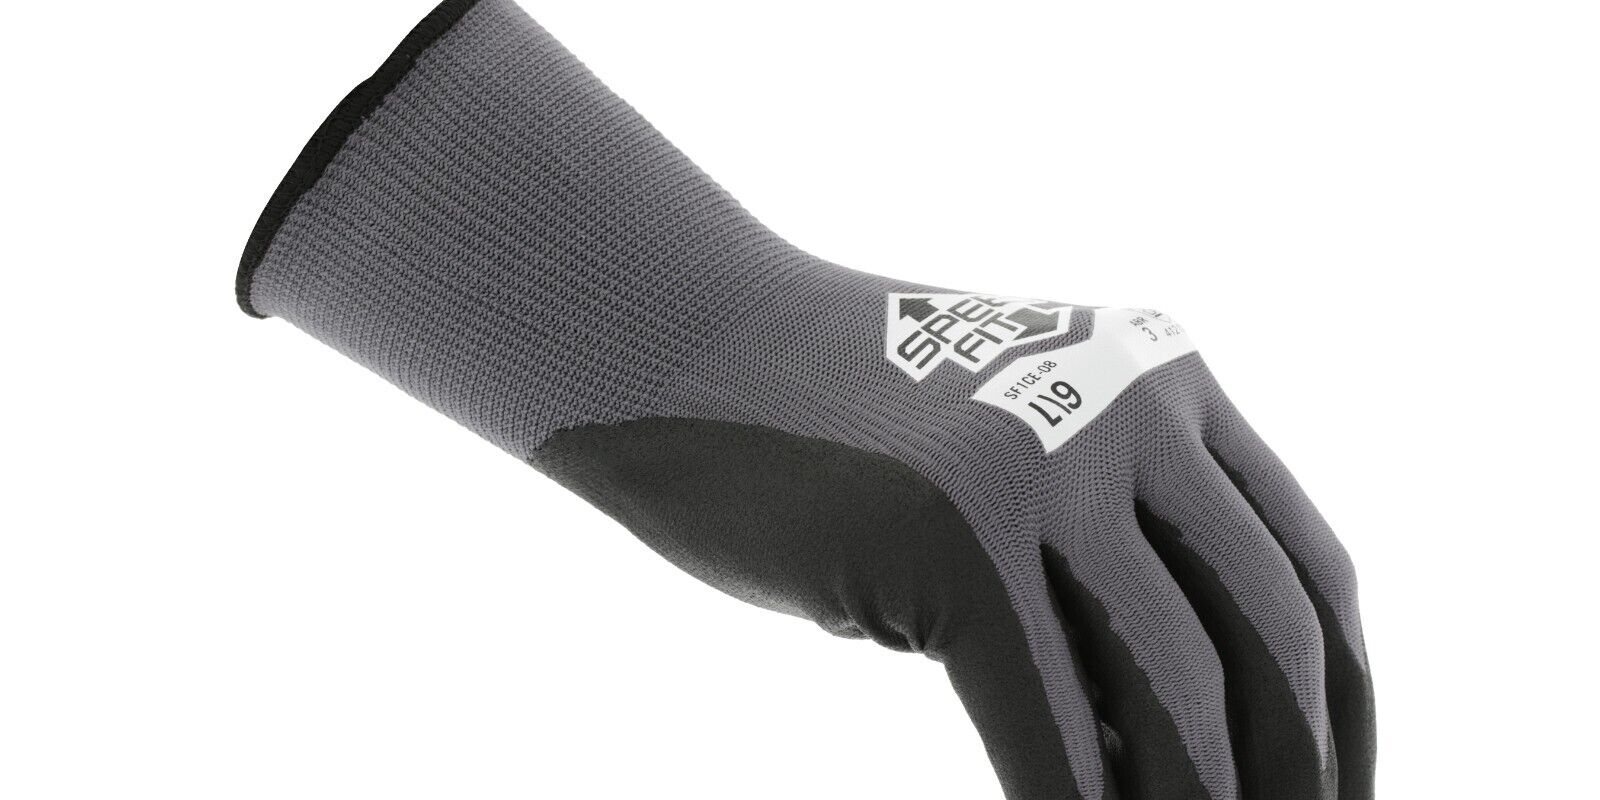 Mechanix Wear Nitrile Coated Cut-Resistant Gloves, Grey, 8.19 in. long, 13 Ga thick, Nylon, 12 Pair in a Pack (SM, MD, L, XL, XXL)